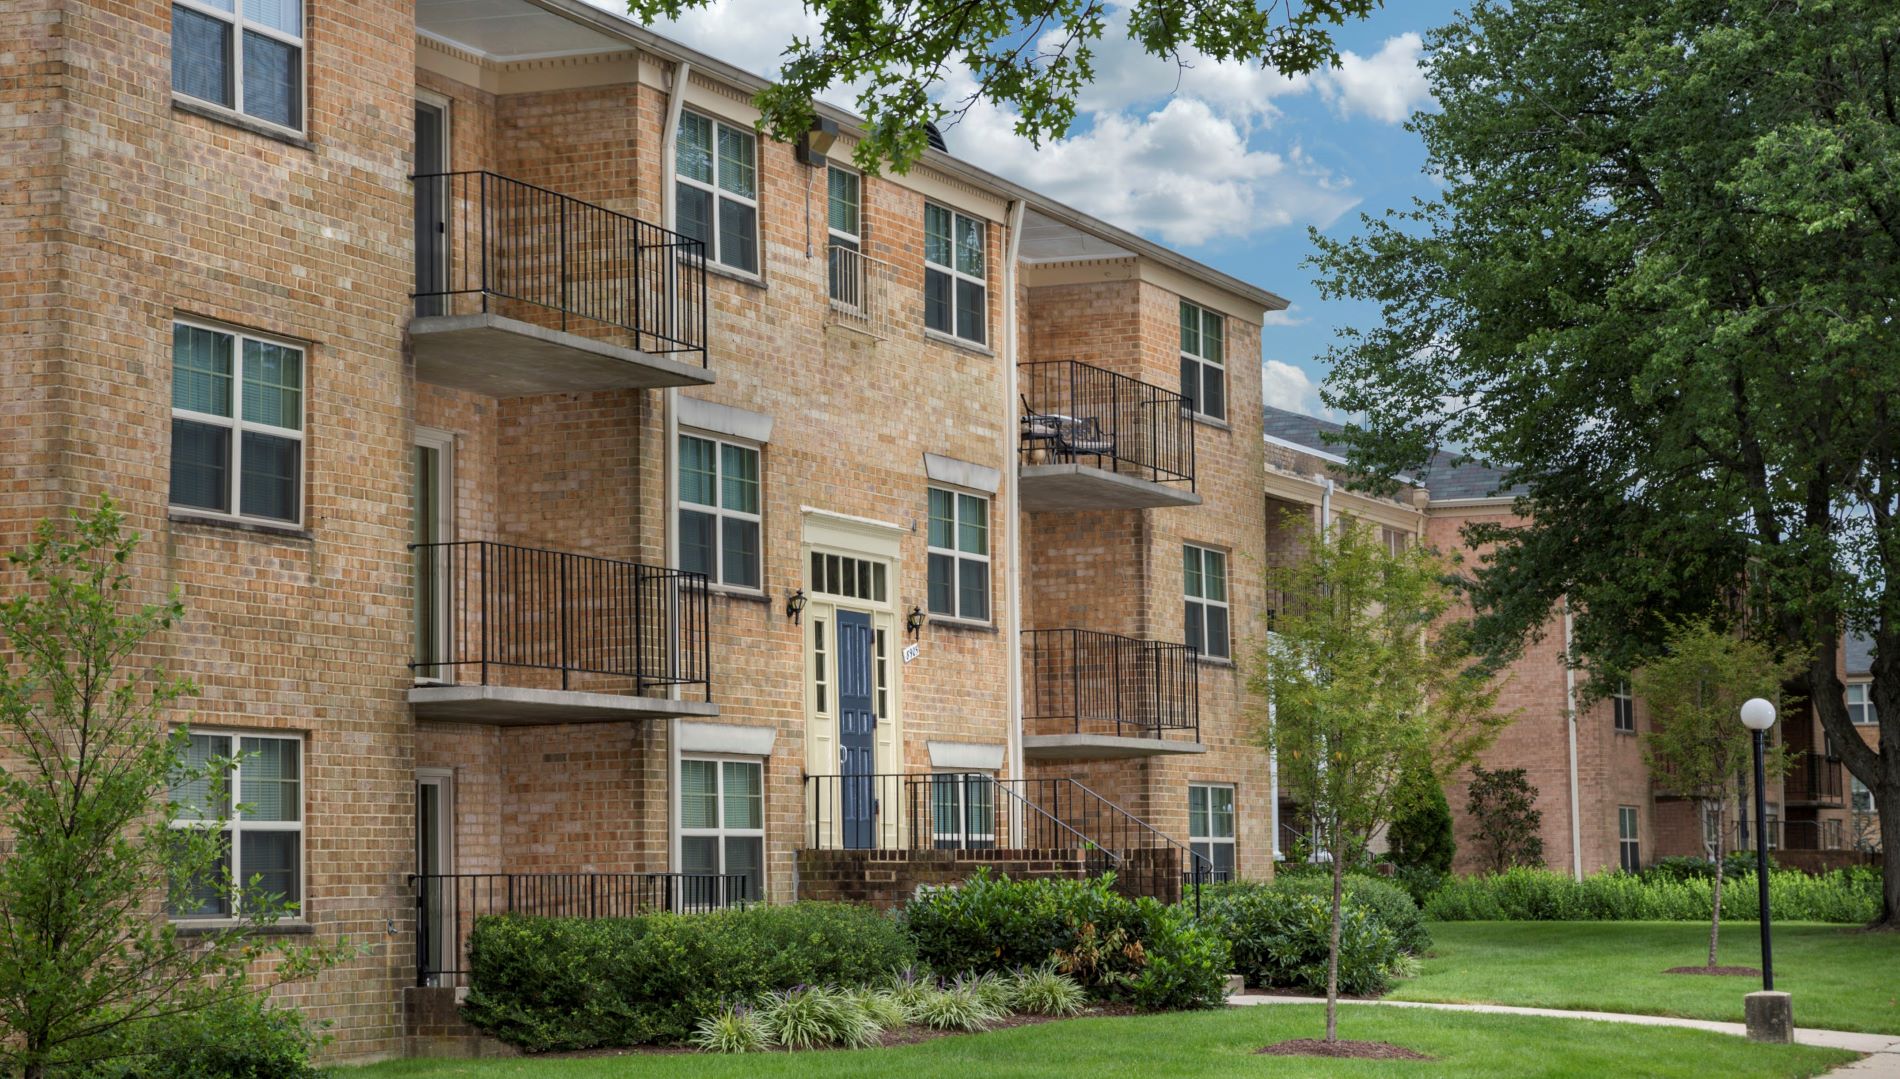 Property Exterior at Deerfield Run & Village Square North